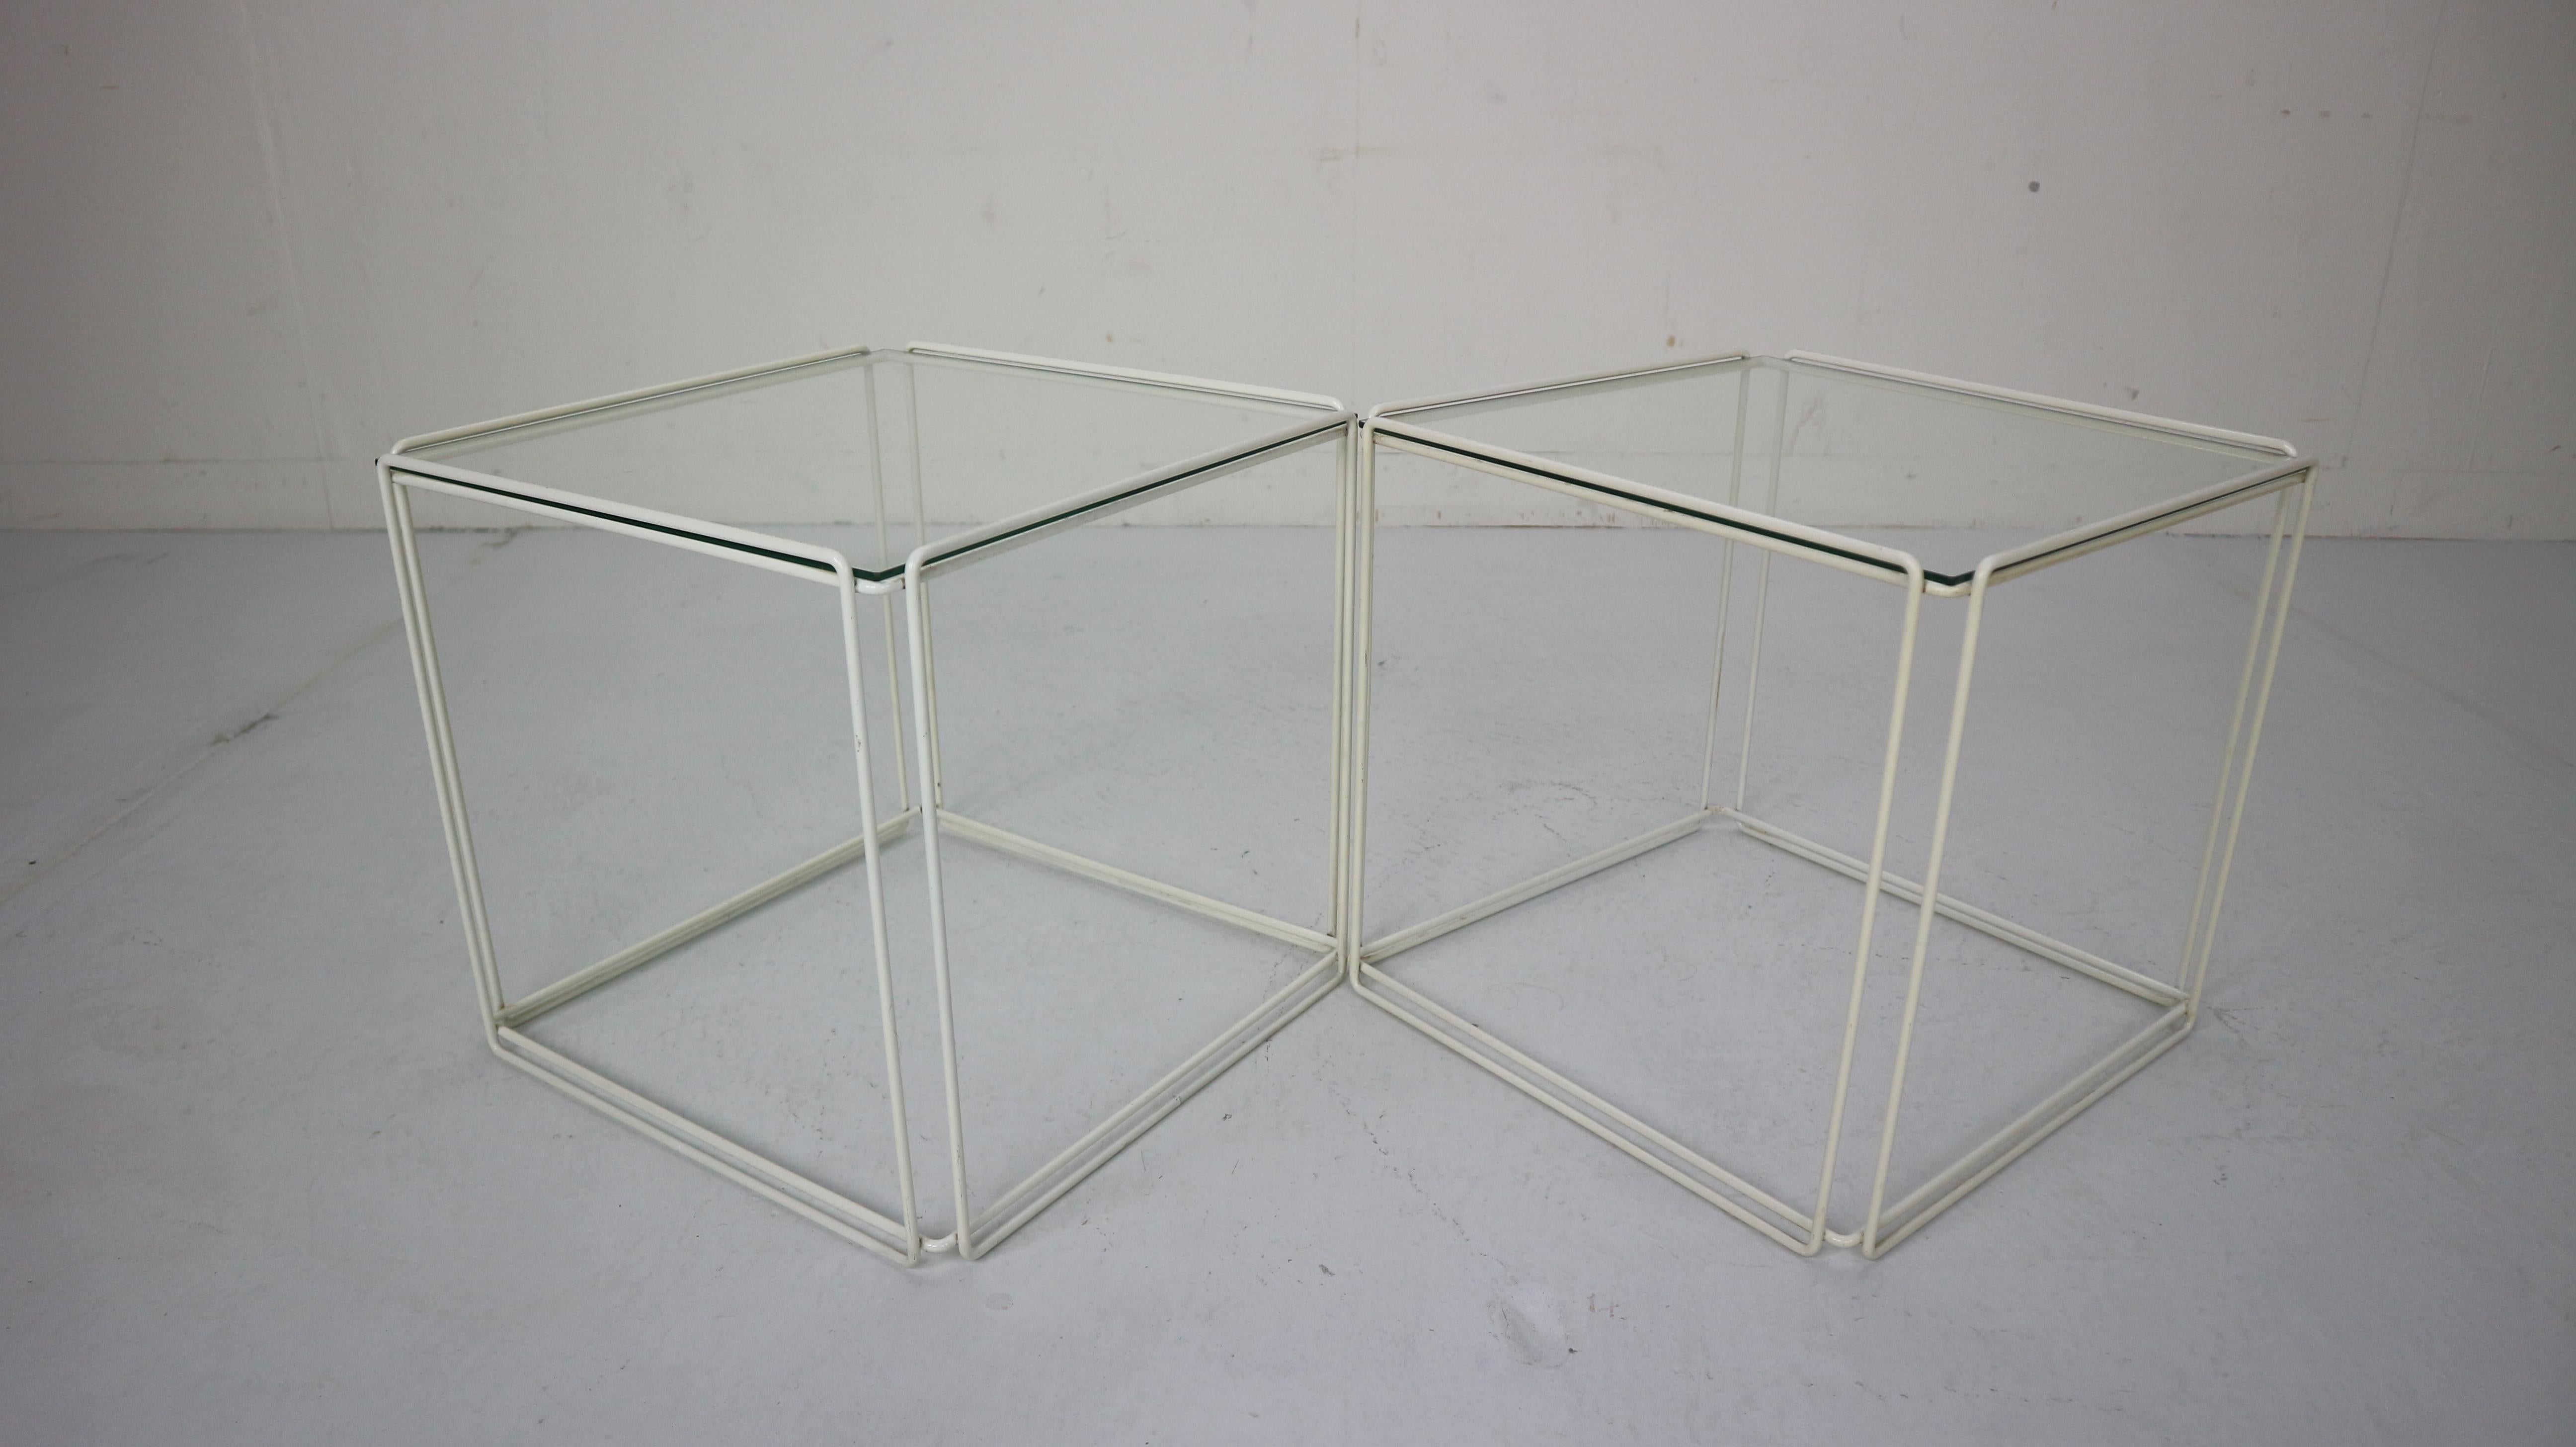 Set of two off-white Minimalist wireframe side tables with glass tops designed by Max Sauze and manufactured for Atrow in 1960s, France.